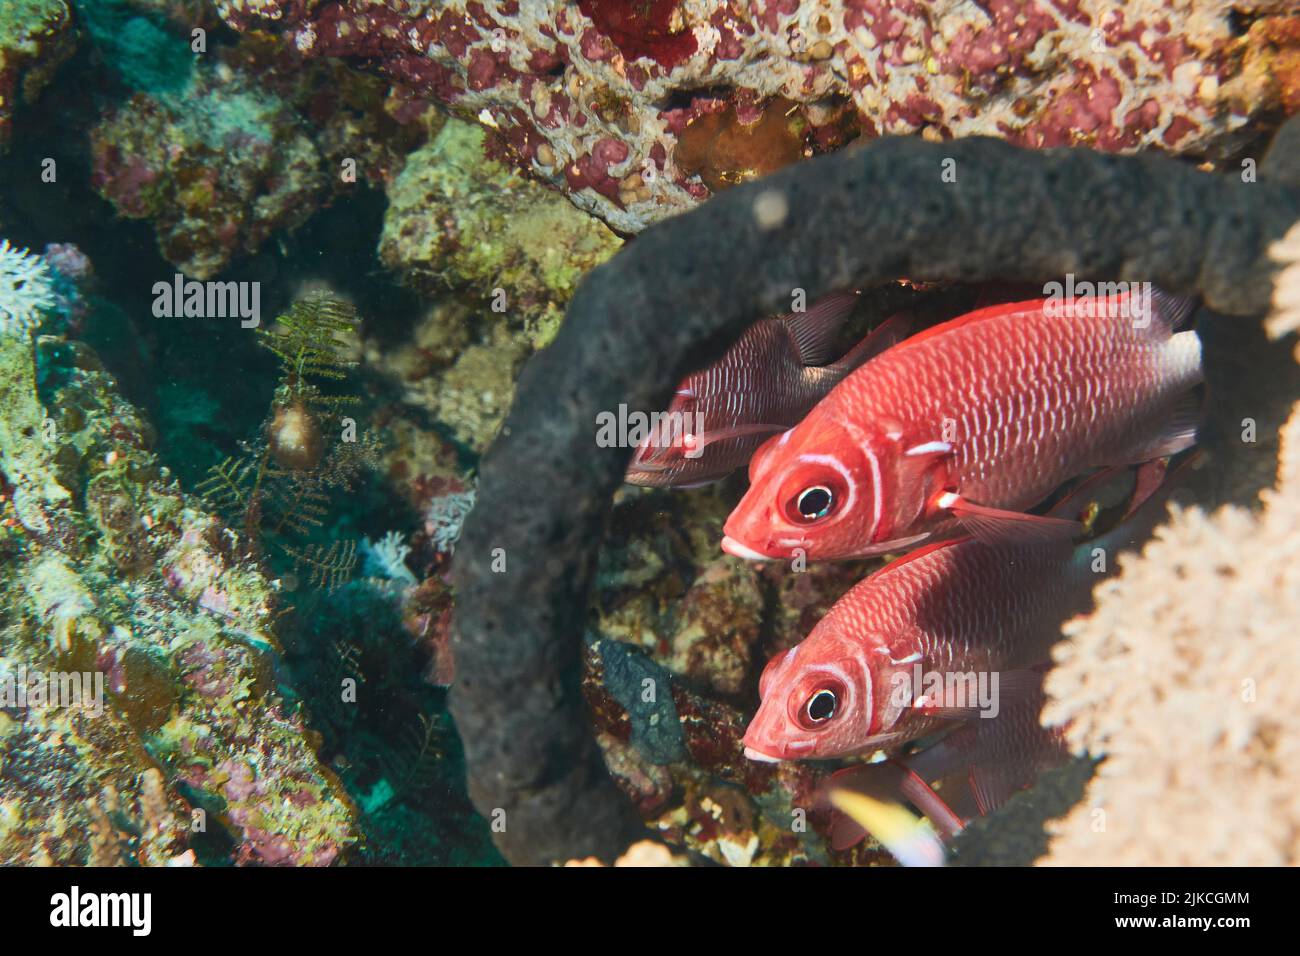 A close-up of two blotcheye soldierfish swimming in underwater coral reef, Red Sea, Egypt Stock Photo